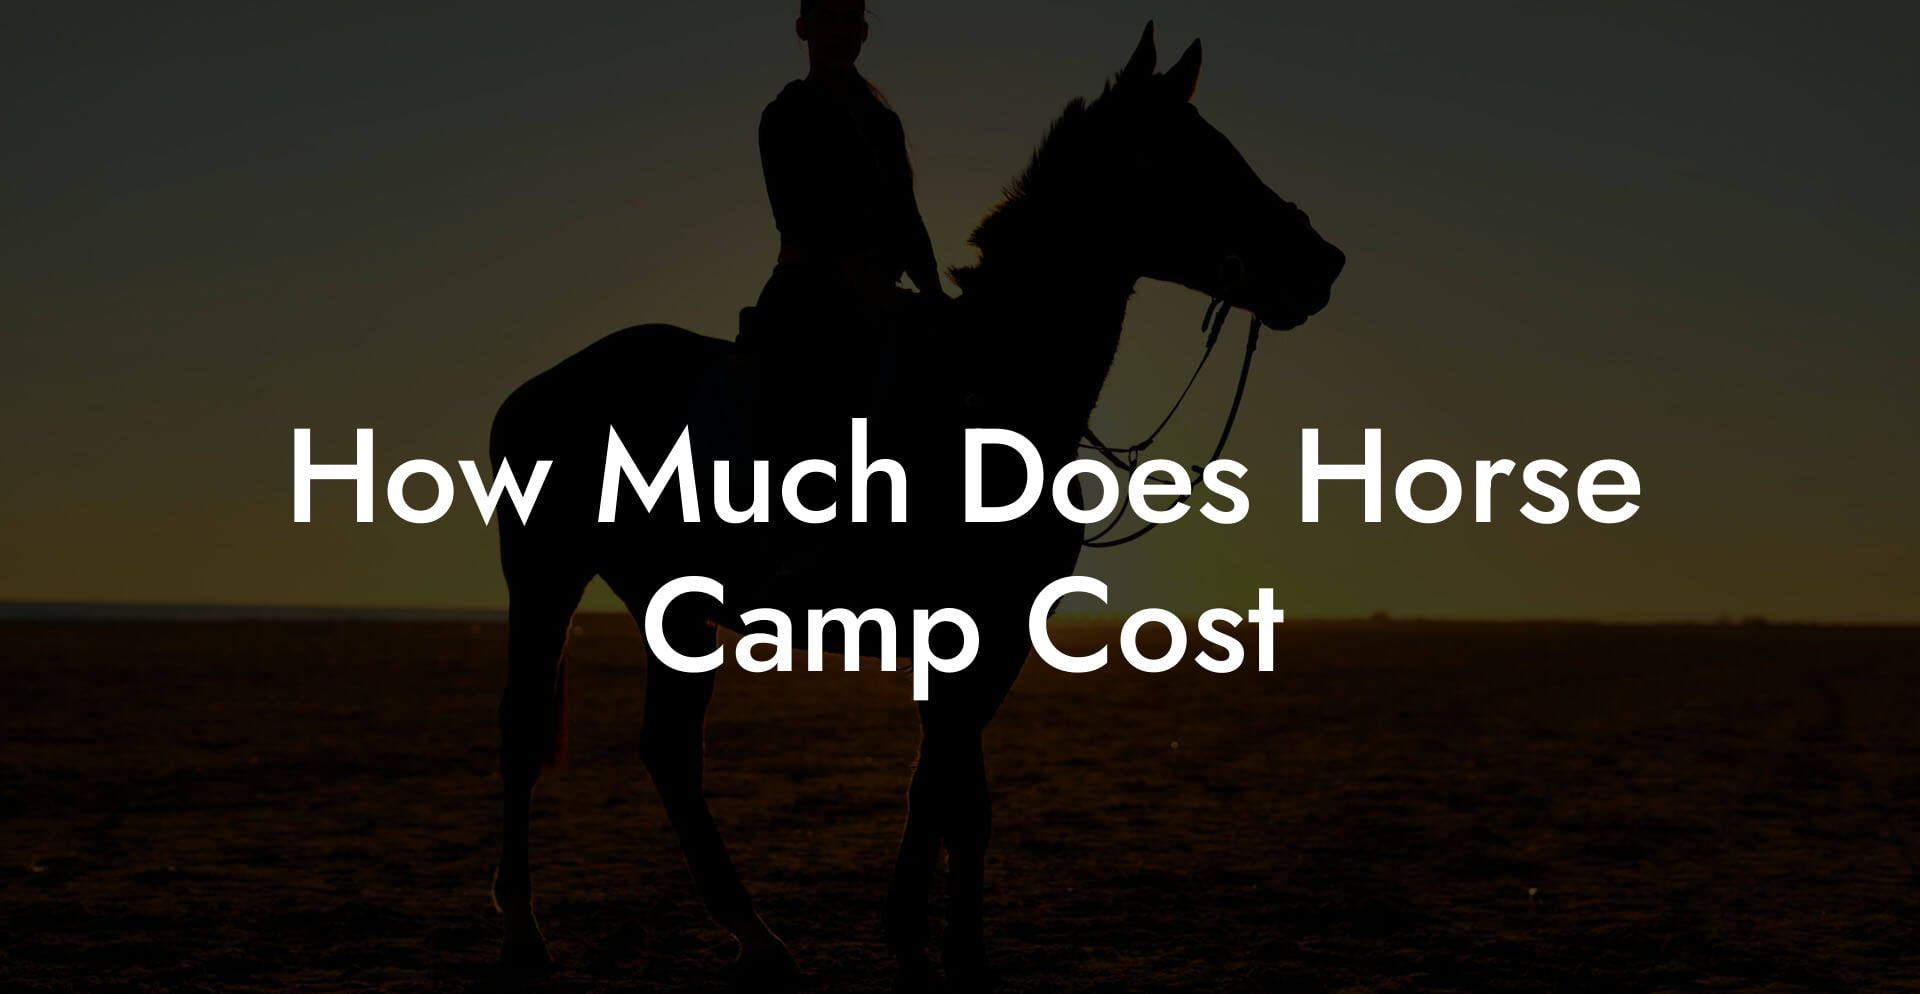 How Much Does Horse Camp Cost